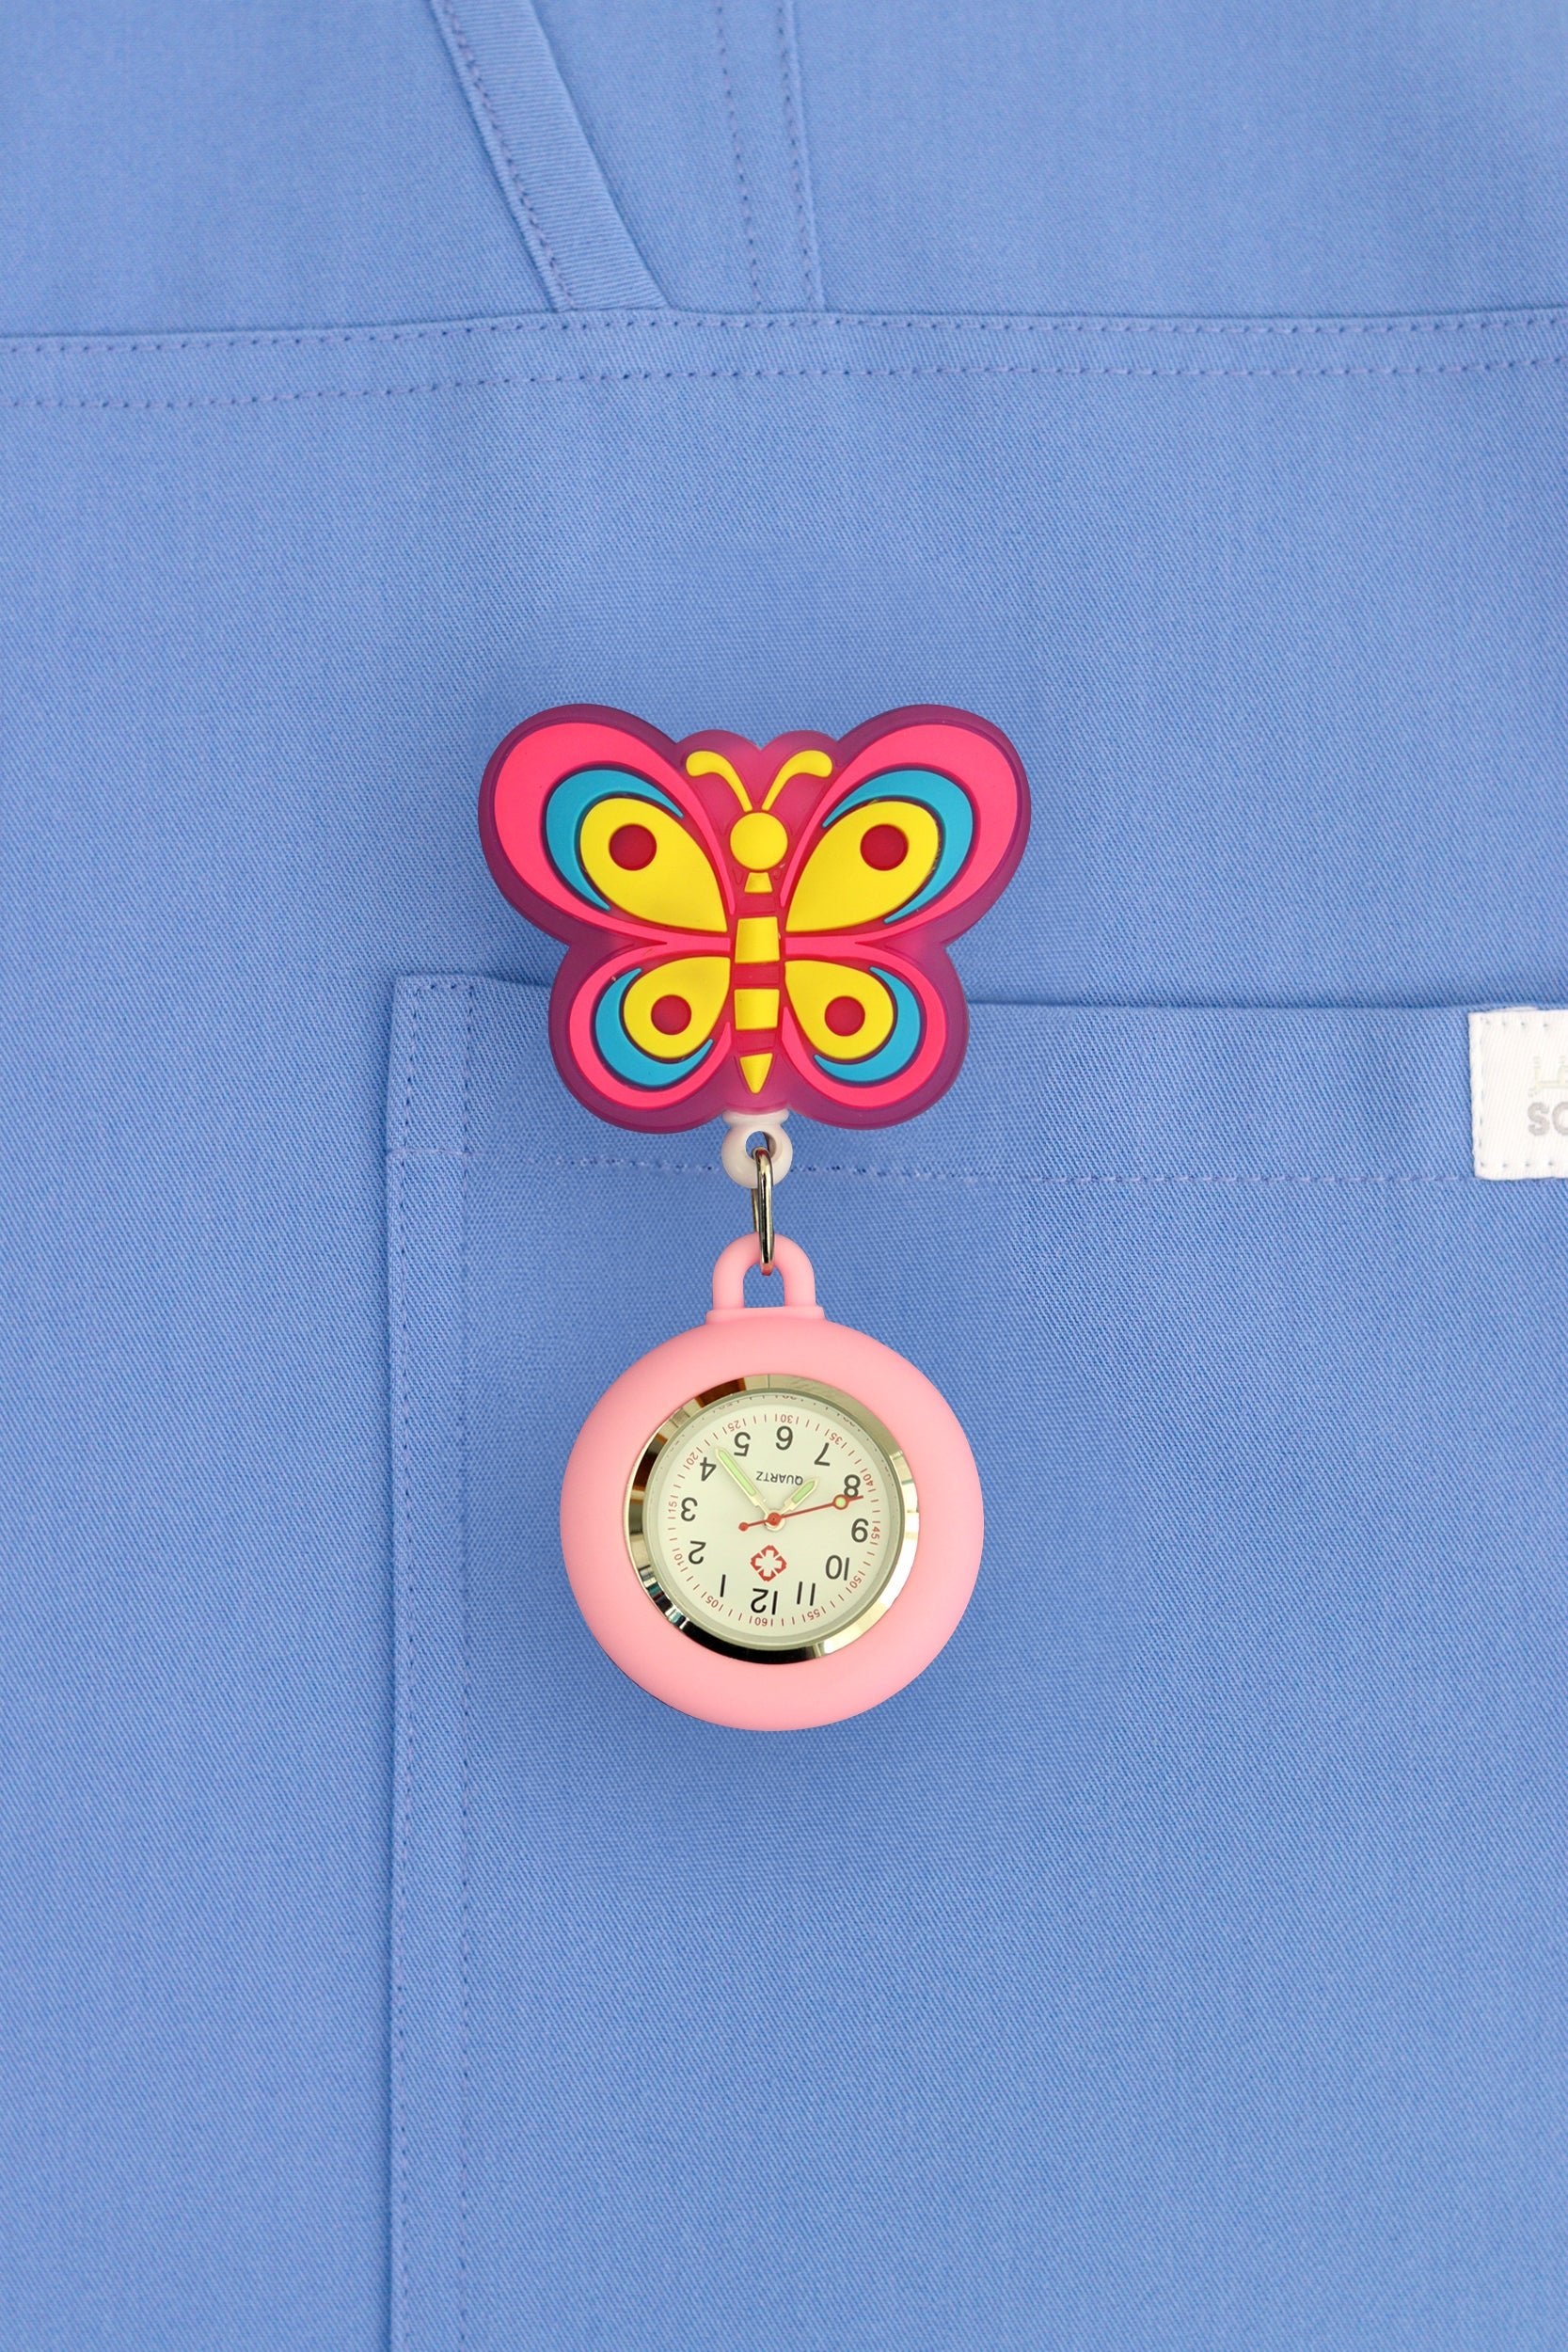 products-butterflyidbadge-964862-jpg